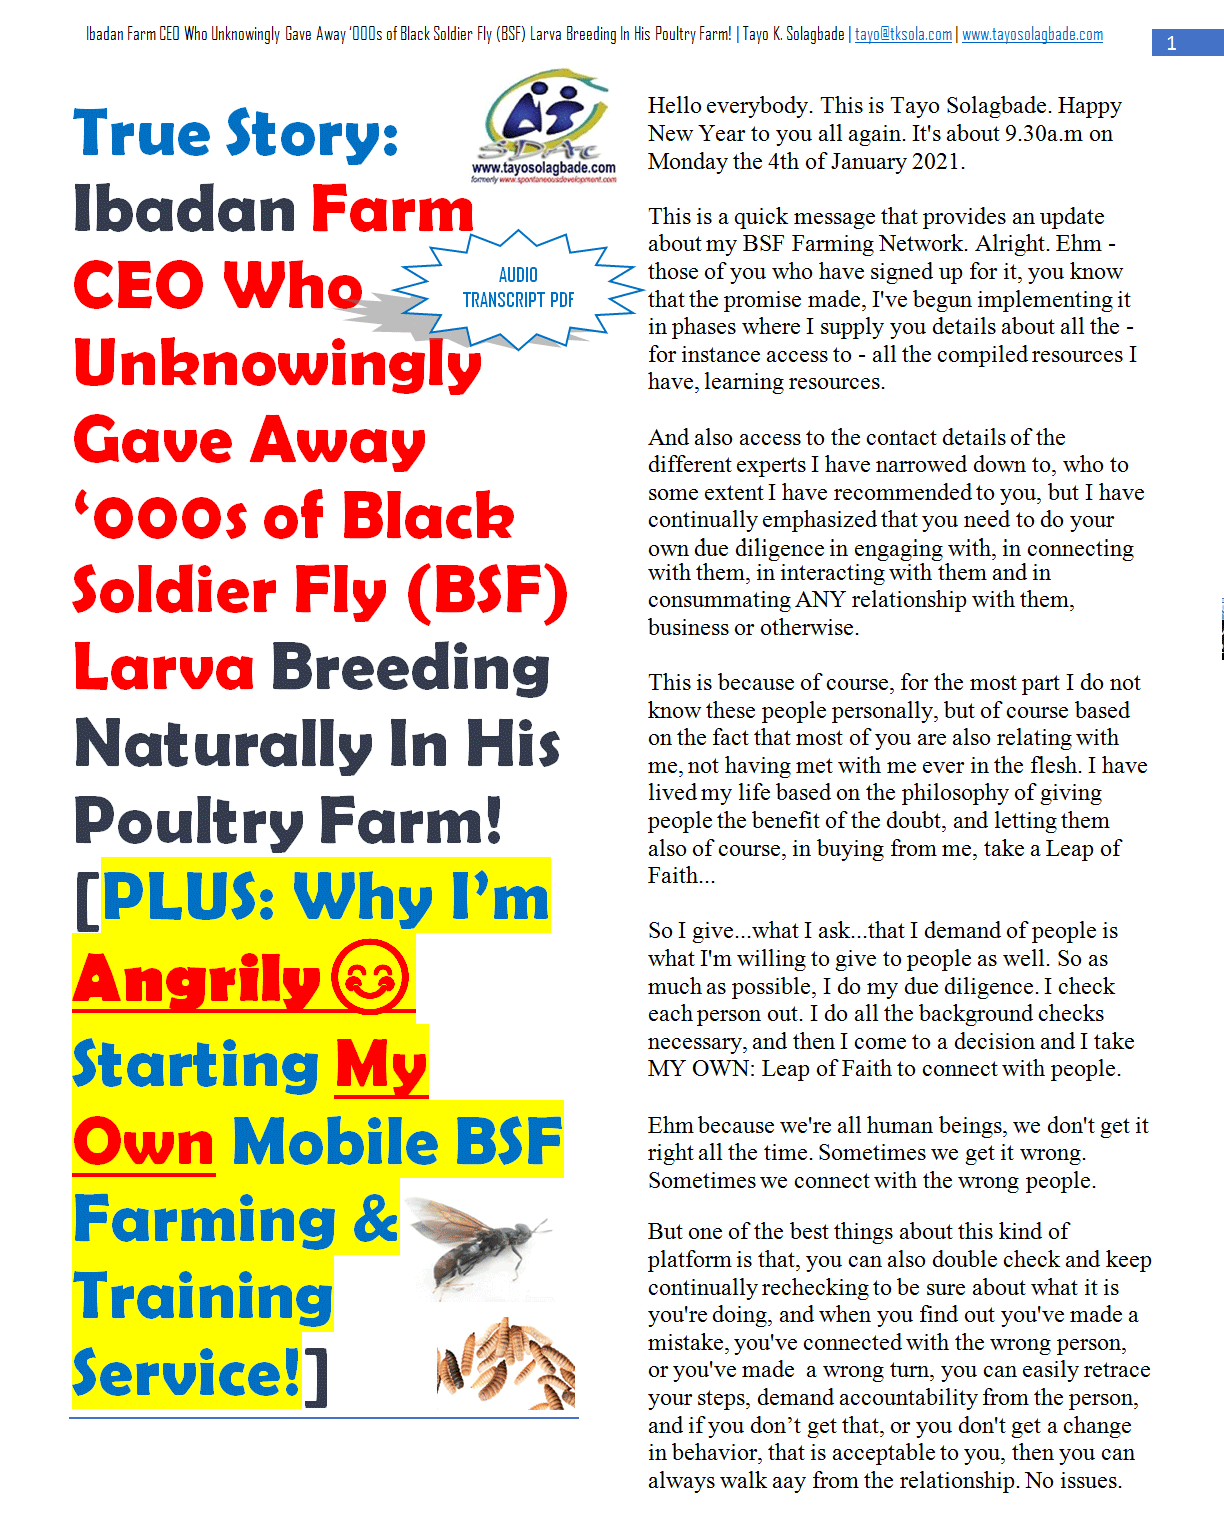 True Story: Ibadan Farm CEO Who Unknowingly Gave Away ‘000s of Black Soldier Fly (BSF) Larva Breeding Naturally In His Poultry Farm! [PLUS: Why I’m Angrily😊 Starting My Own Mobile BSF Farming & Training Service!]